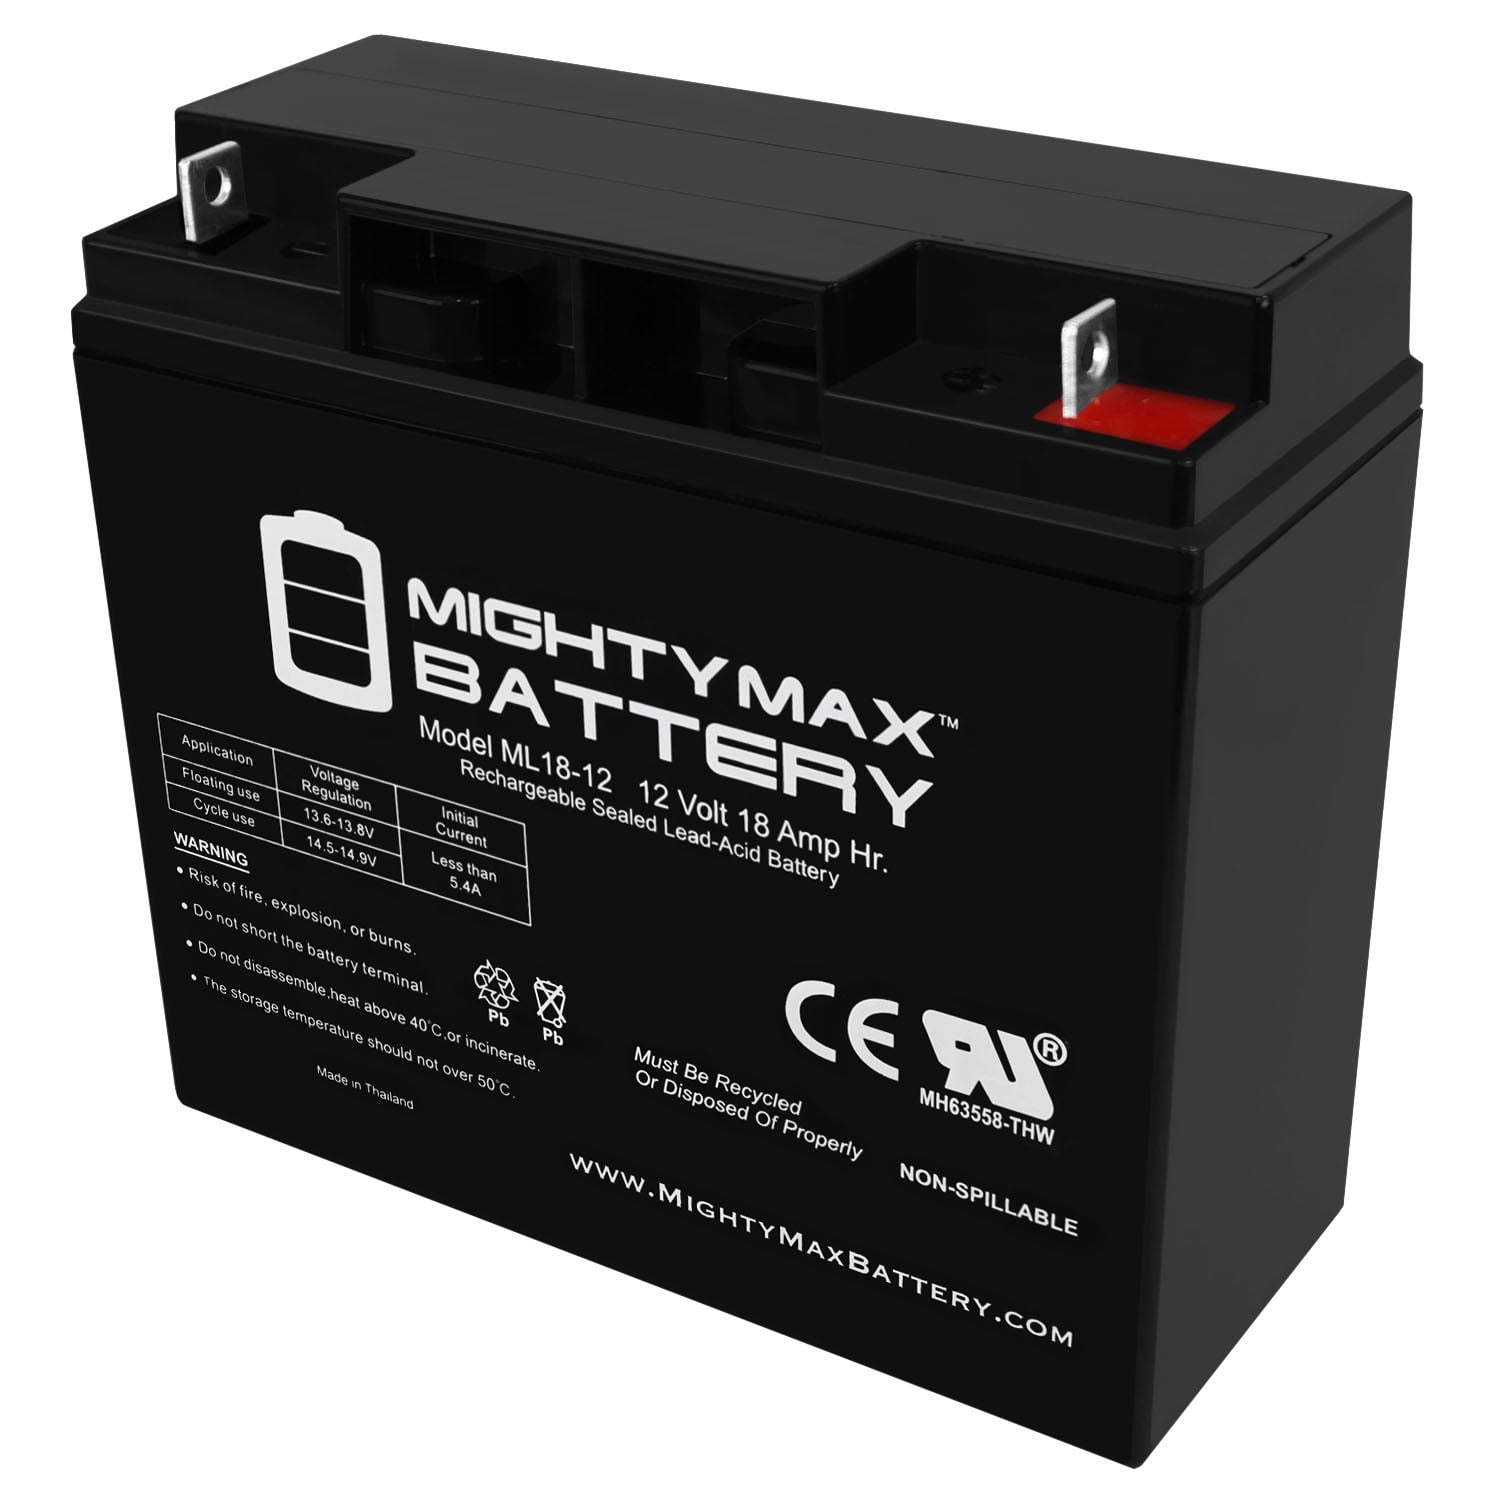 12V 18AH 600 Watts Car Stereo Battery replaces SPV20 SPP680 *FREE SHIPPING*